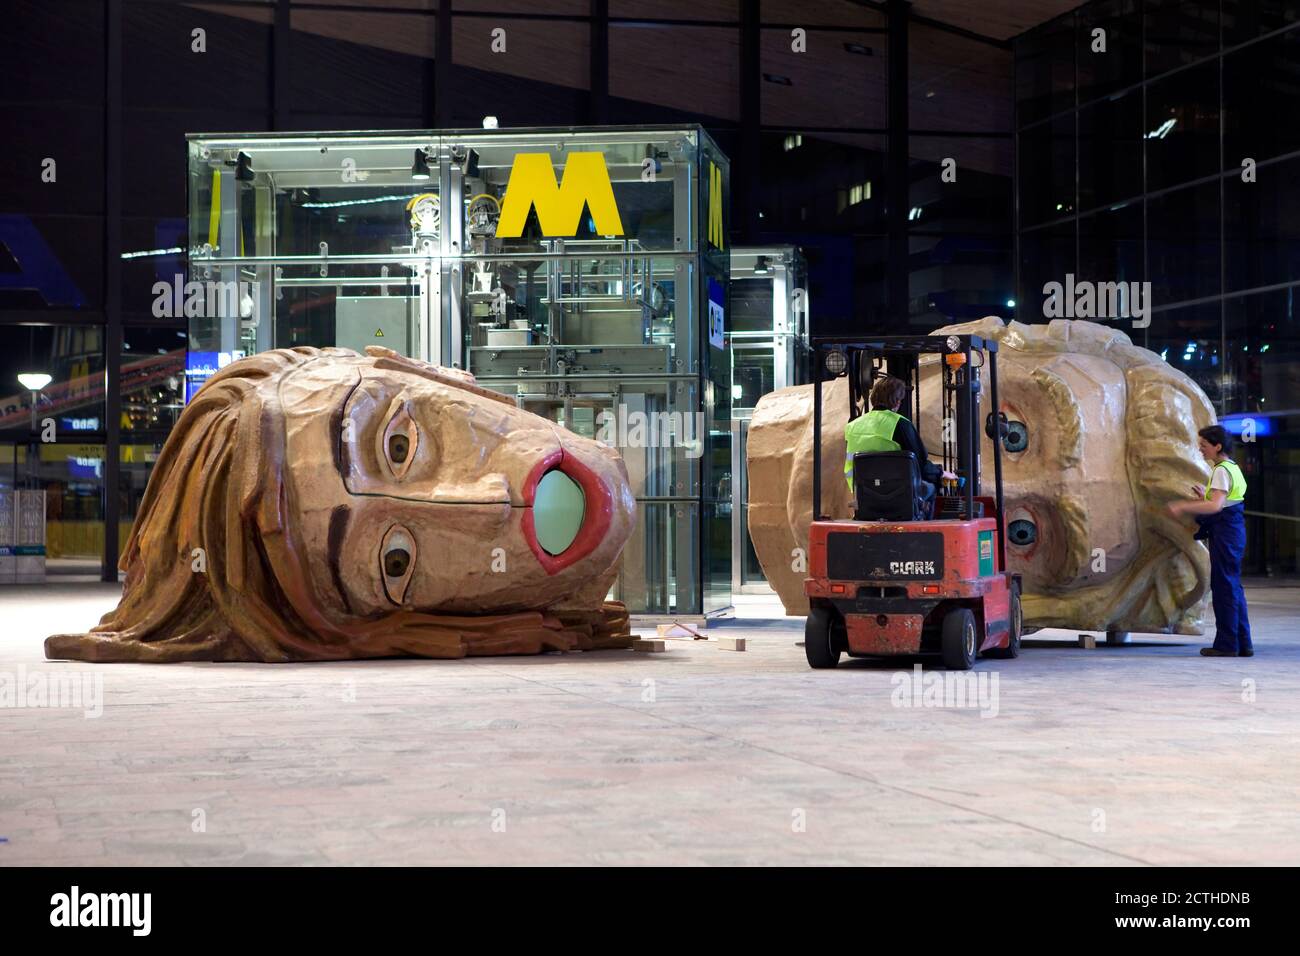 ROTTERDAM - Placing of giant heads by art studio van Lieshout in the central station Stock Photo